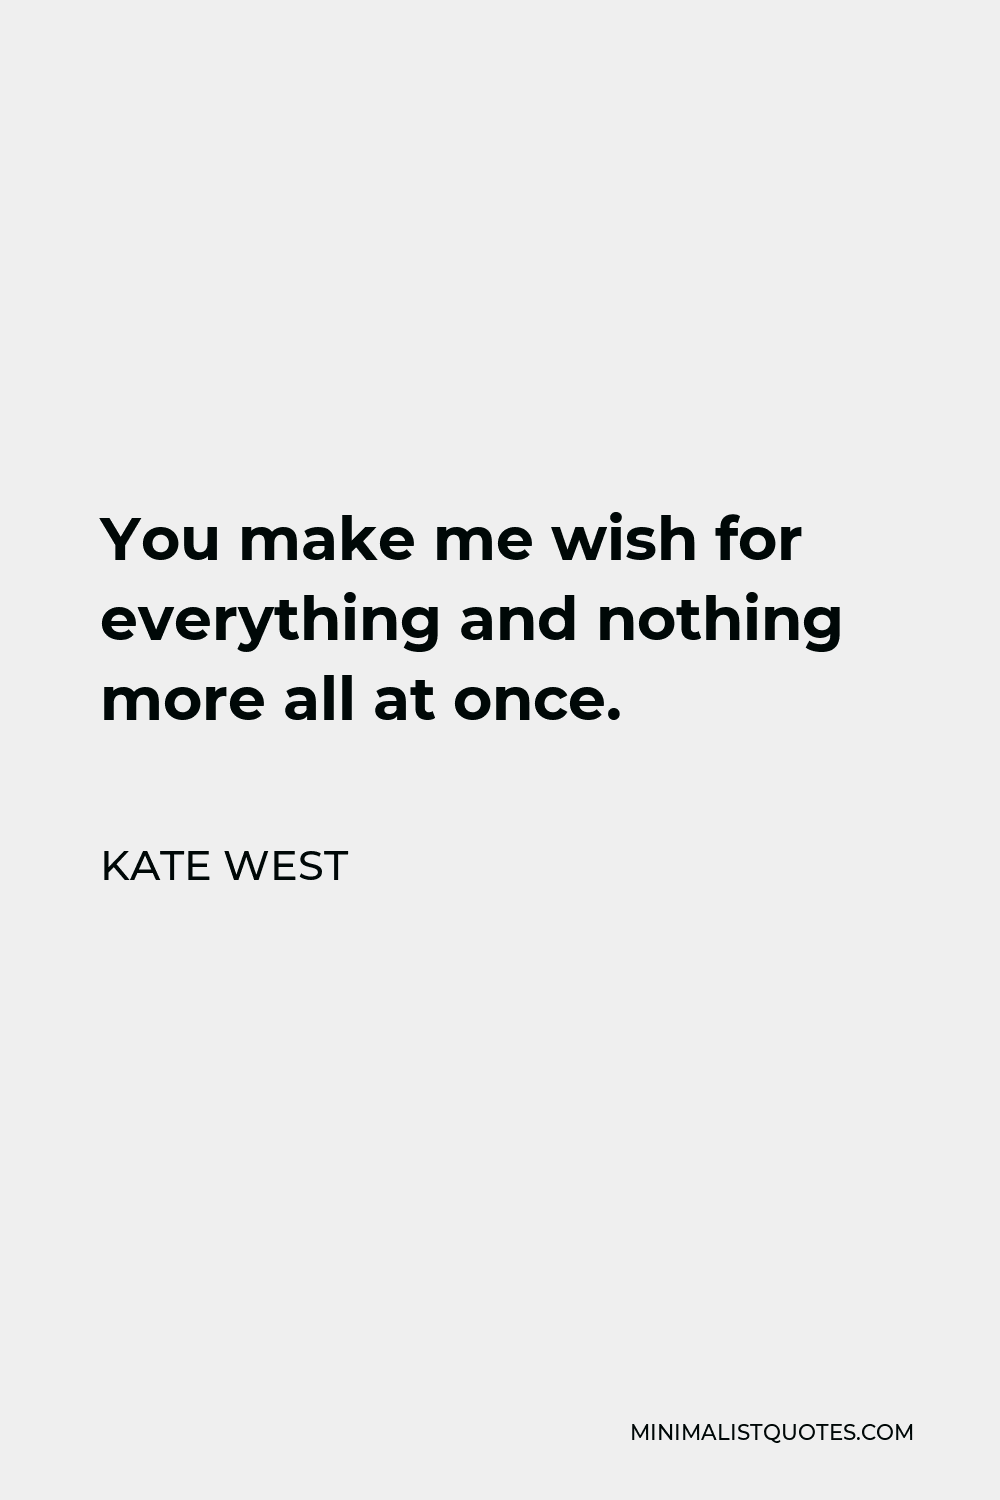 Kate West Quote - You make me wish for everything and nothing more all at once.